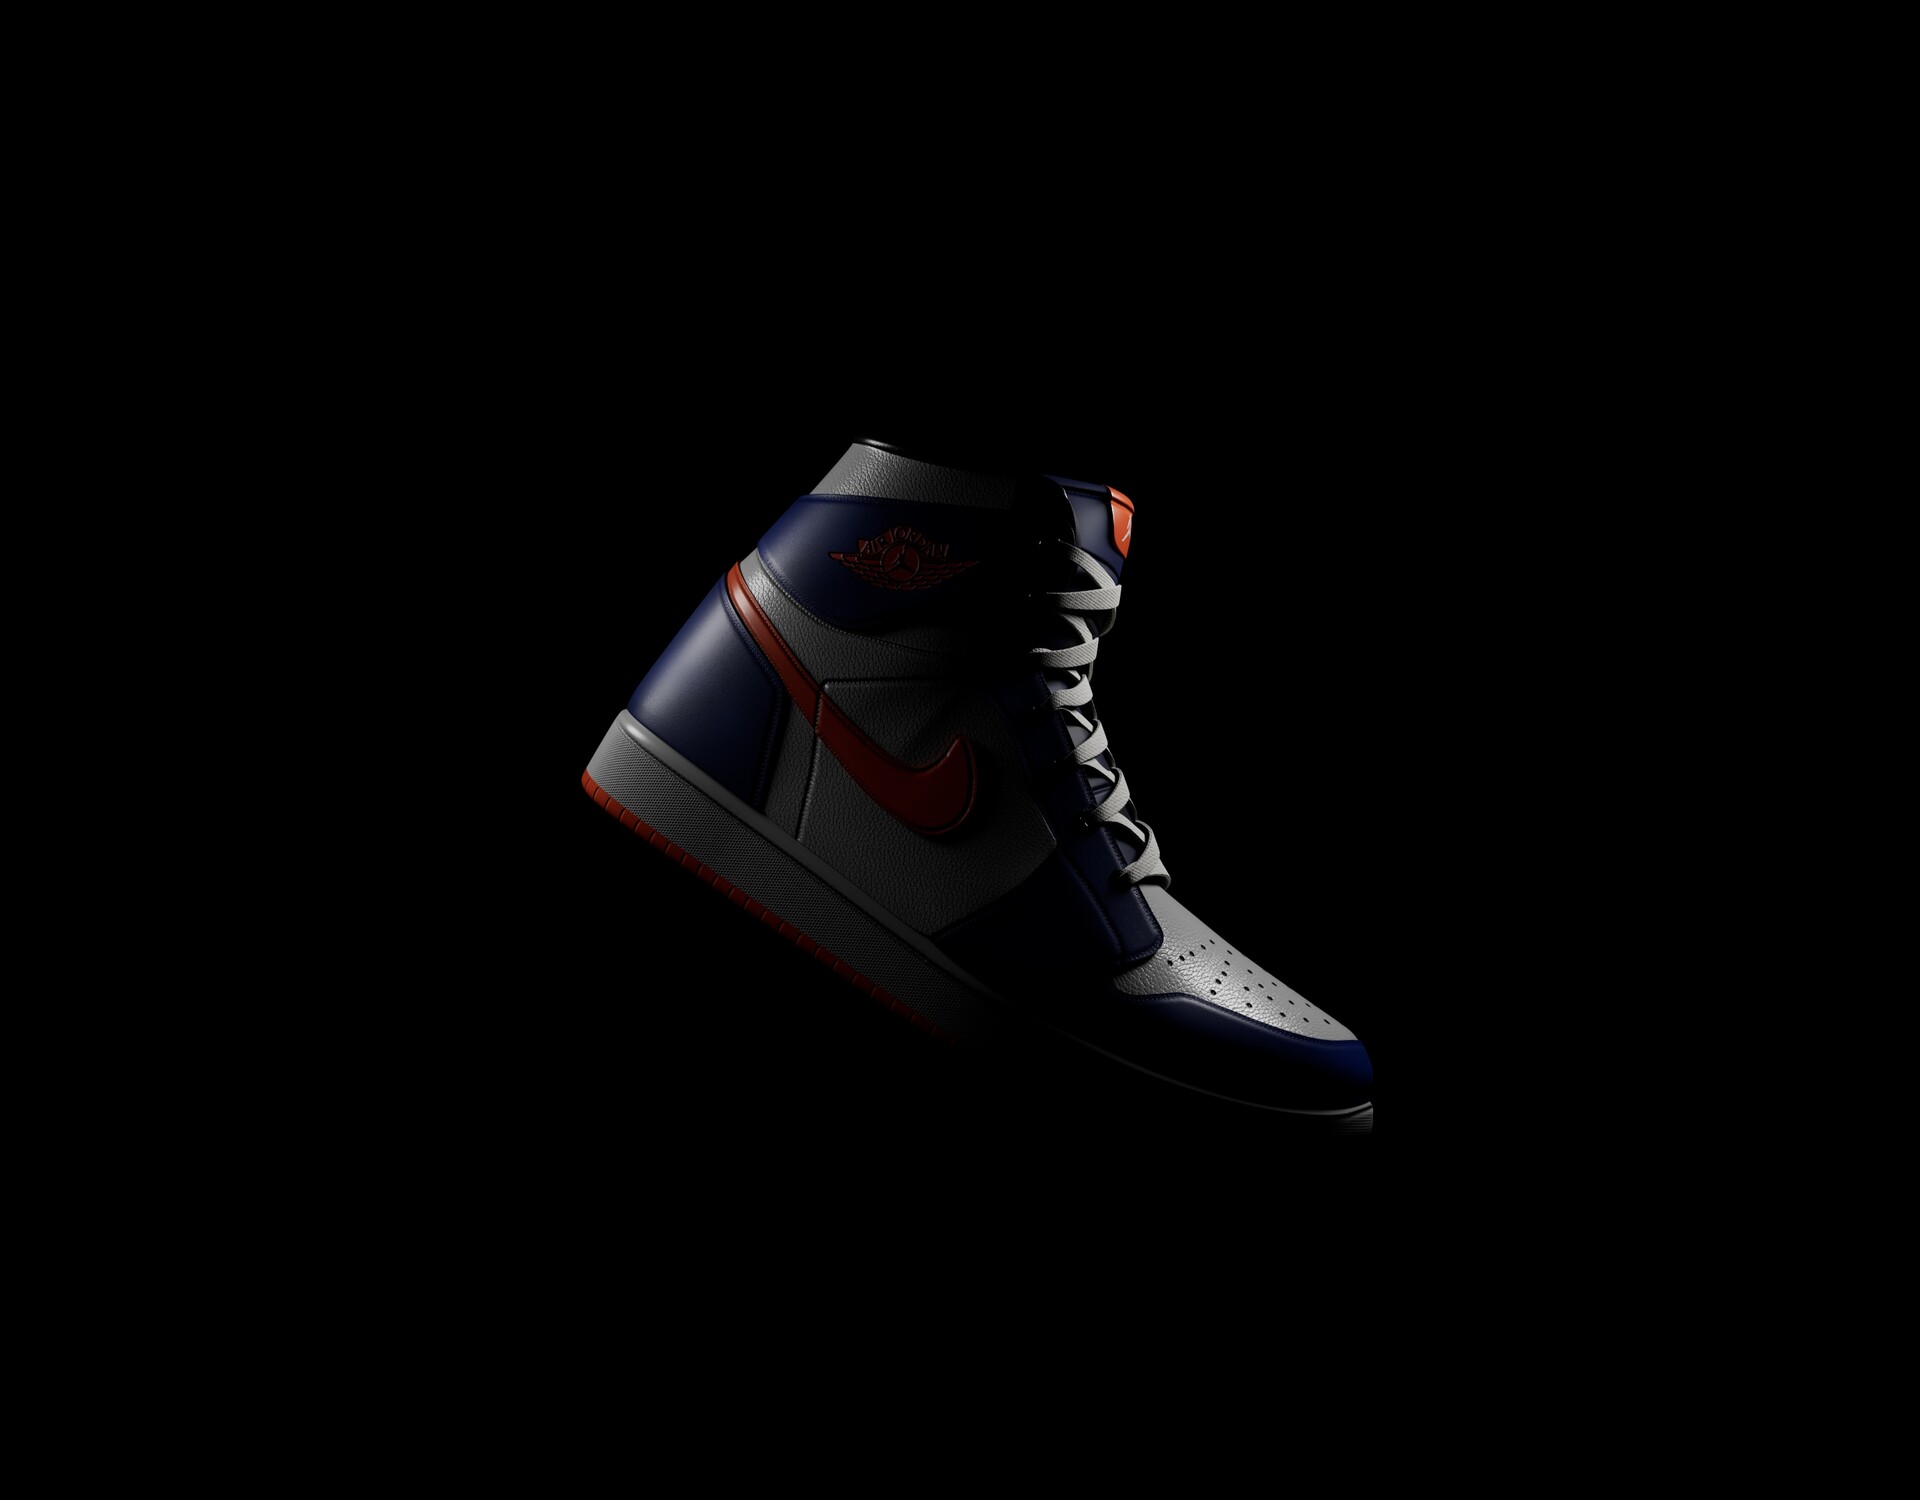 ArtStation - One of the most hyped sneakers of 2021, the Air Jordan 1.